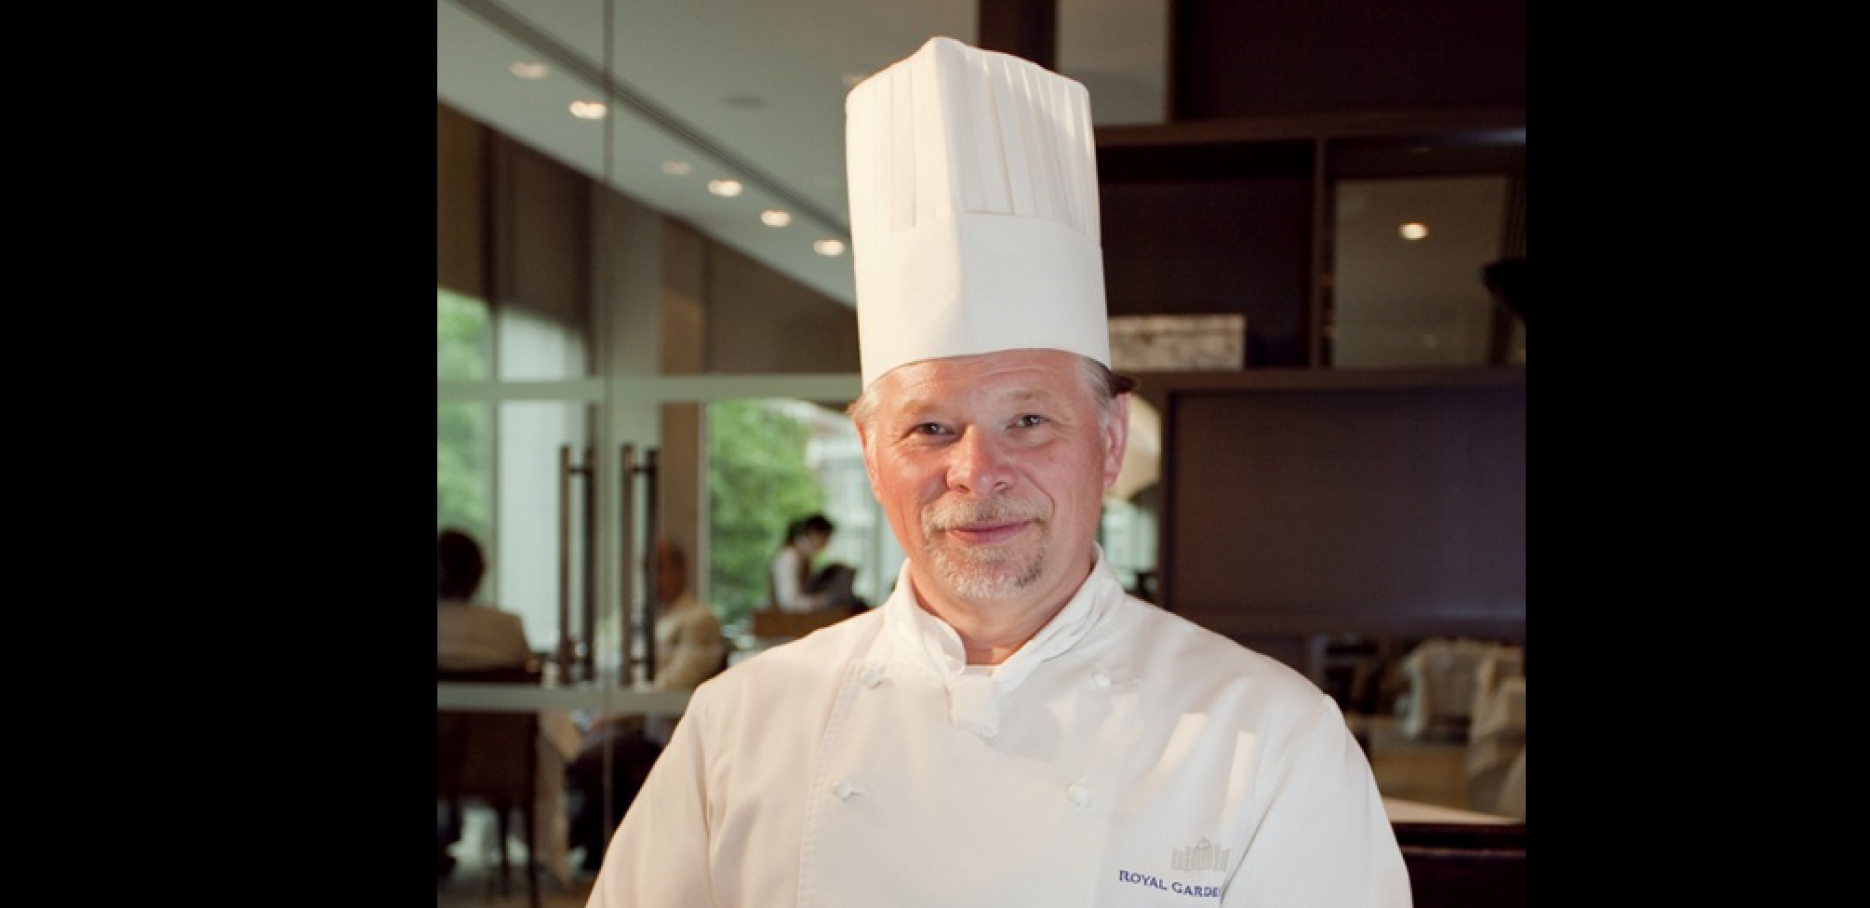 Steve Munkley vice president of the Craft Guild of Chefs